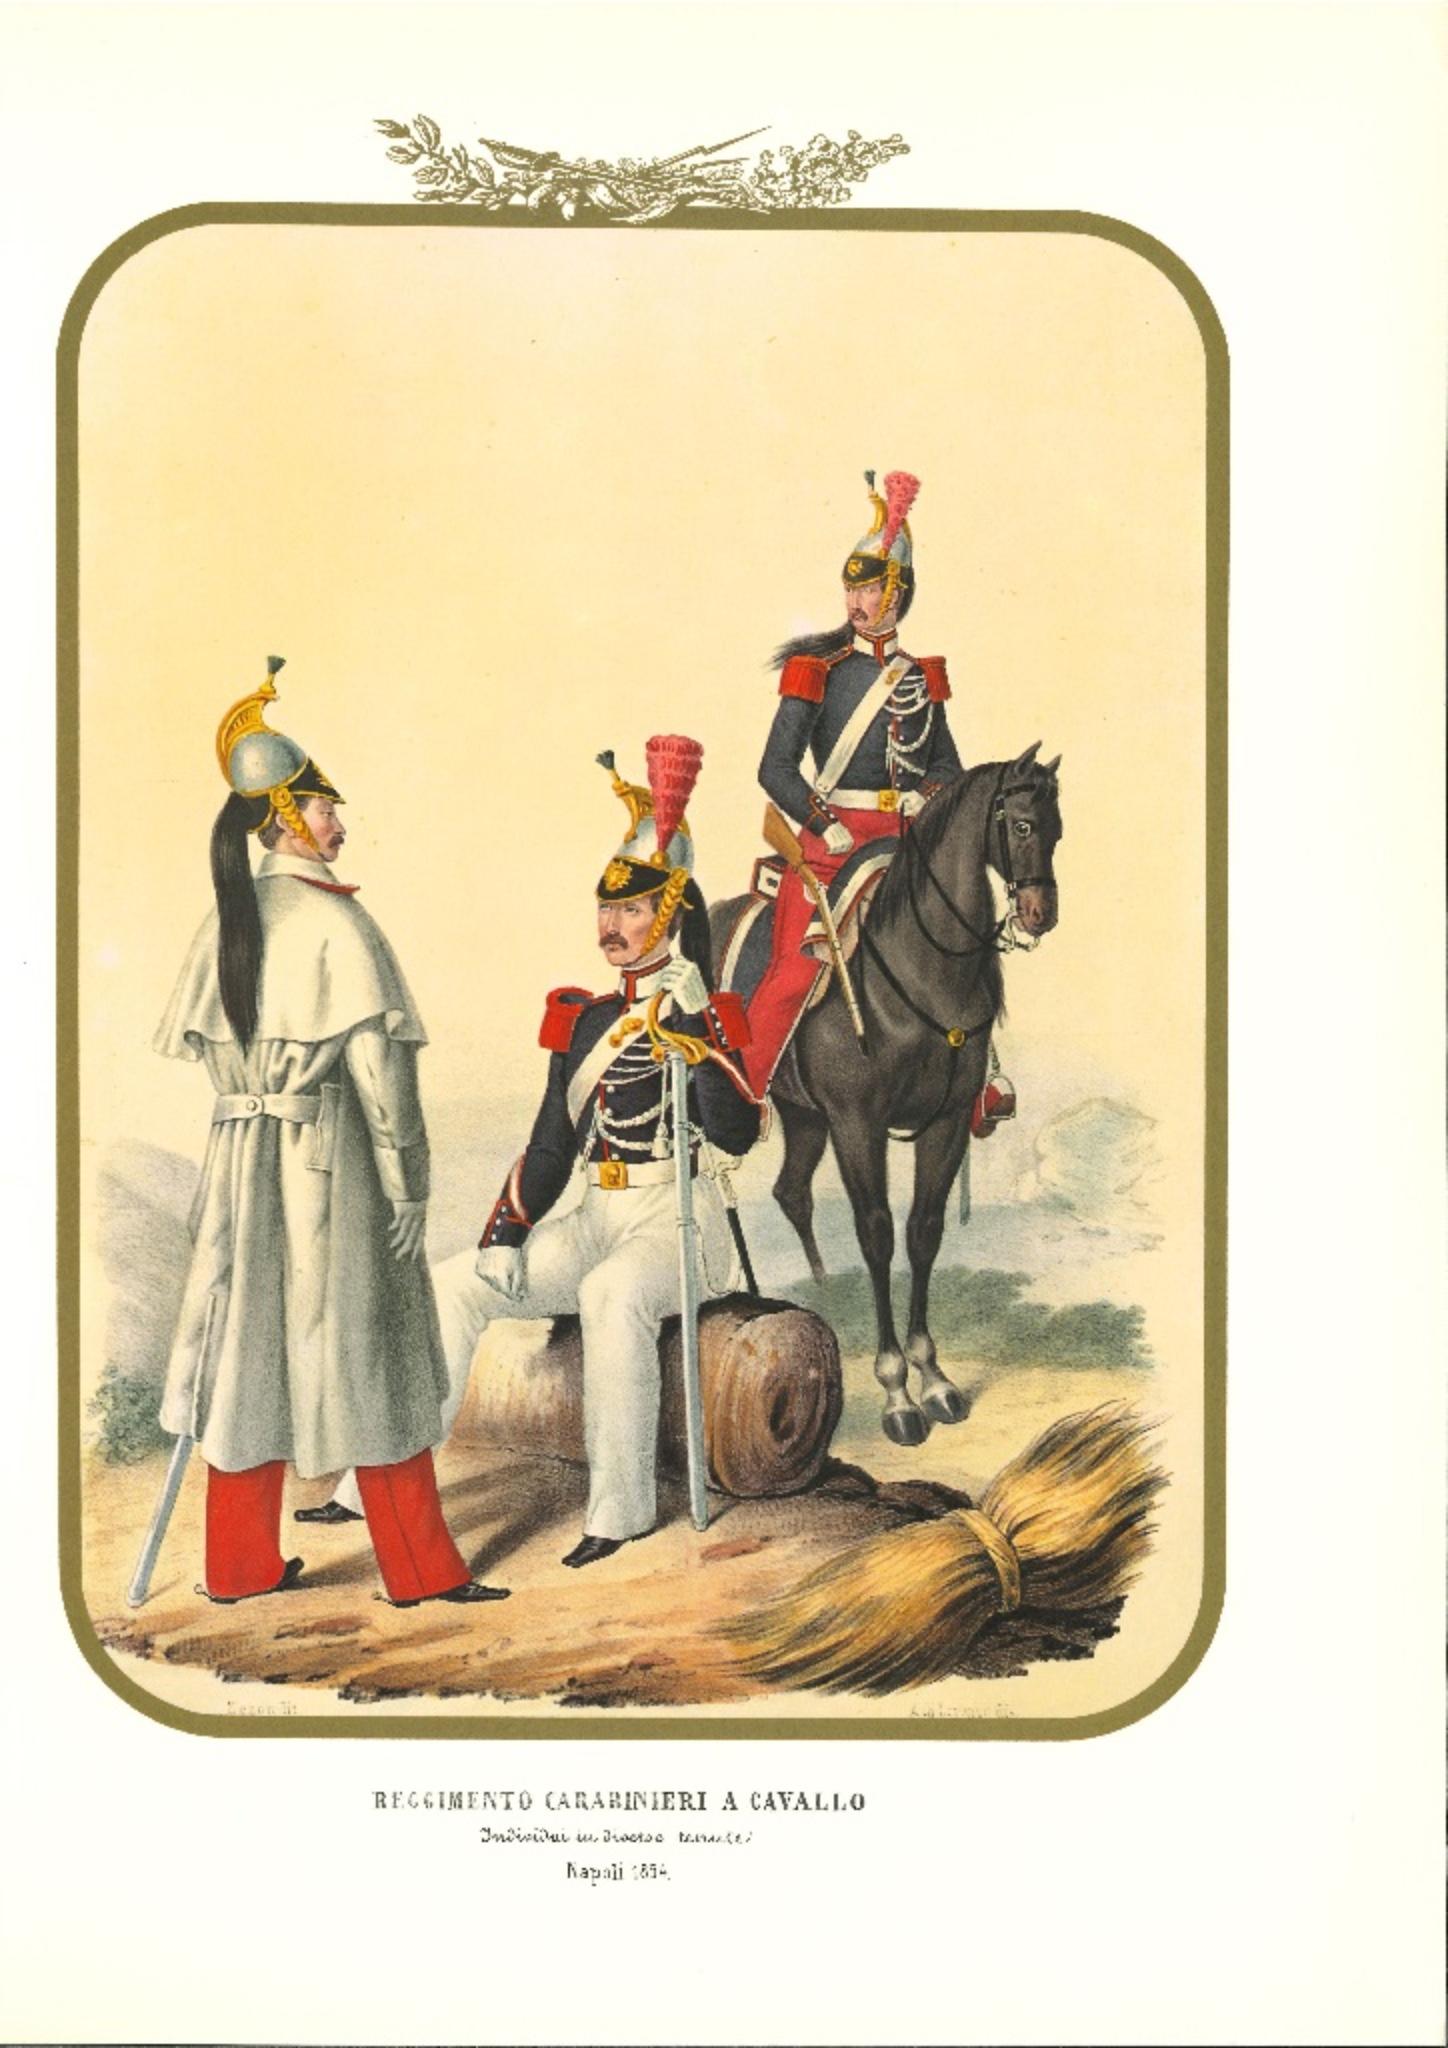 Carabinieri Regiment on Horseback is a lithograph by Antonio Zezon. Naples 1854.

Interesting colored lithograph which describes three members of the Carabinieri Regiment on Horseback: Individuals in several estates including one of them riding his